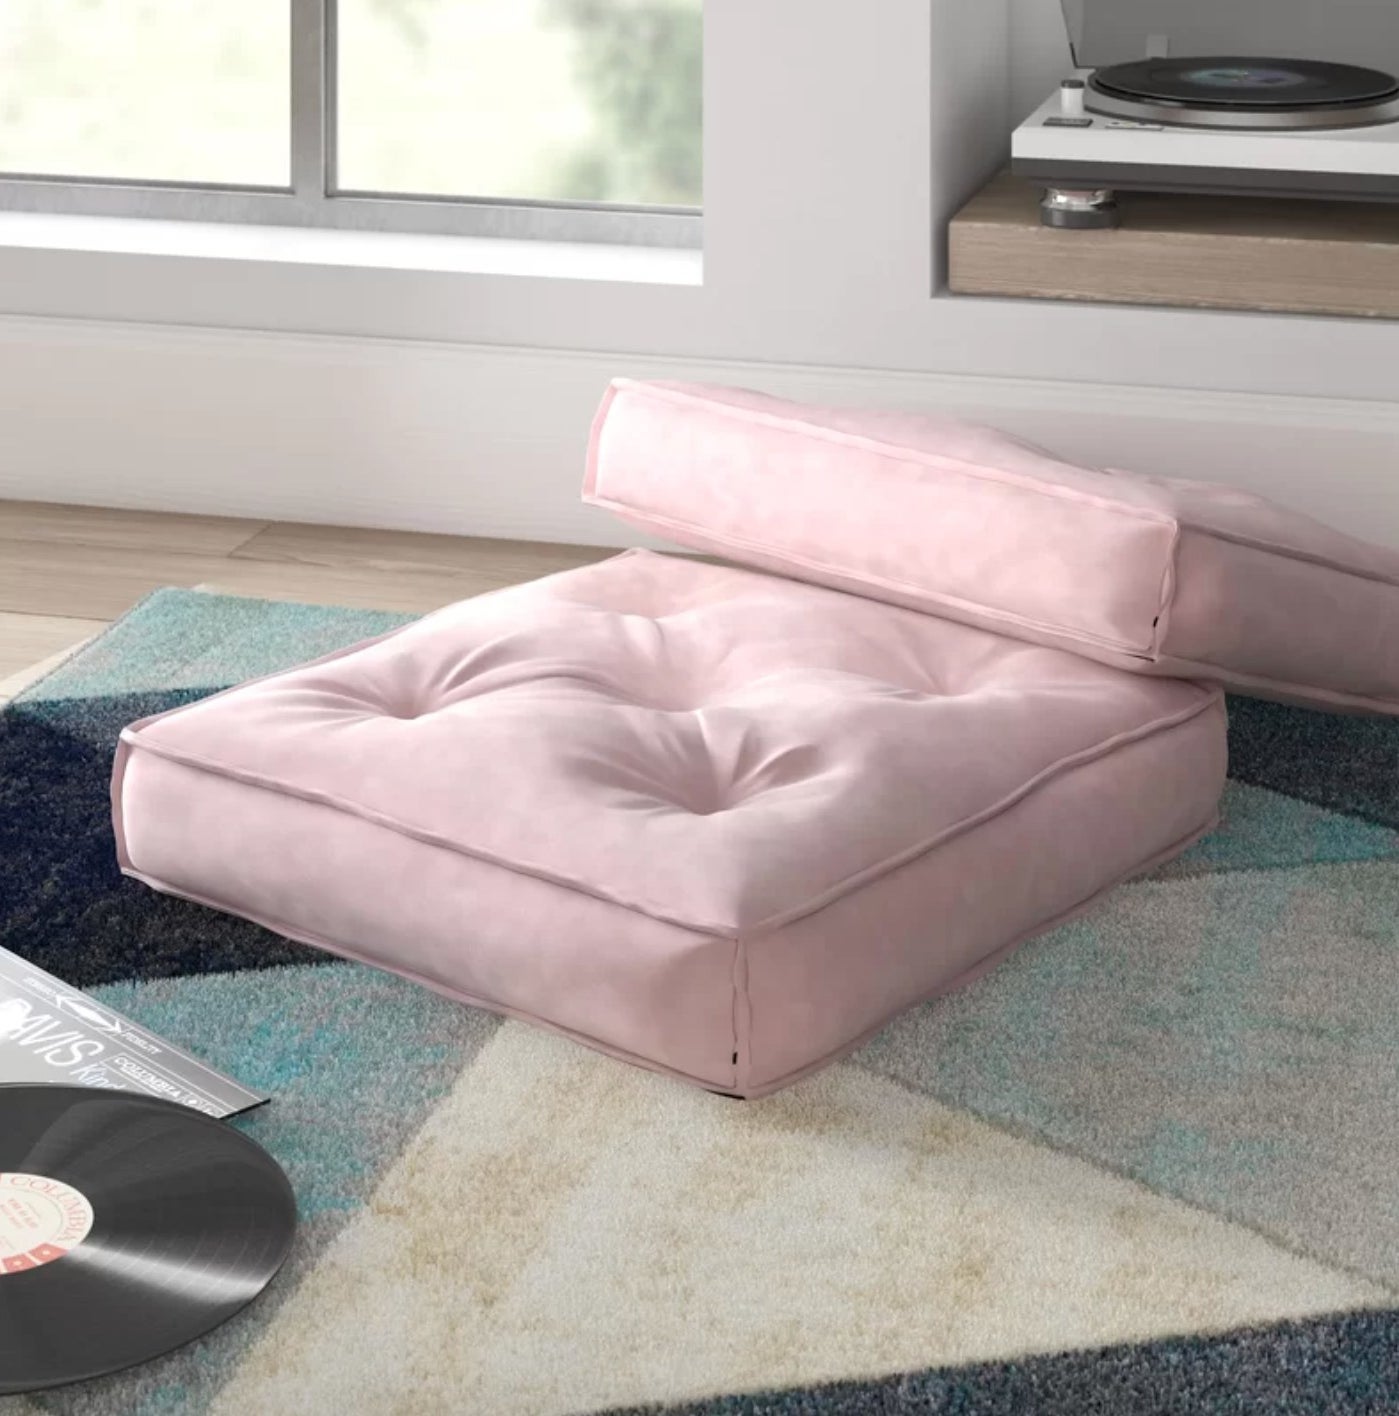 The square floor pillow in blush